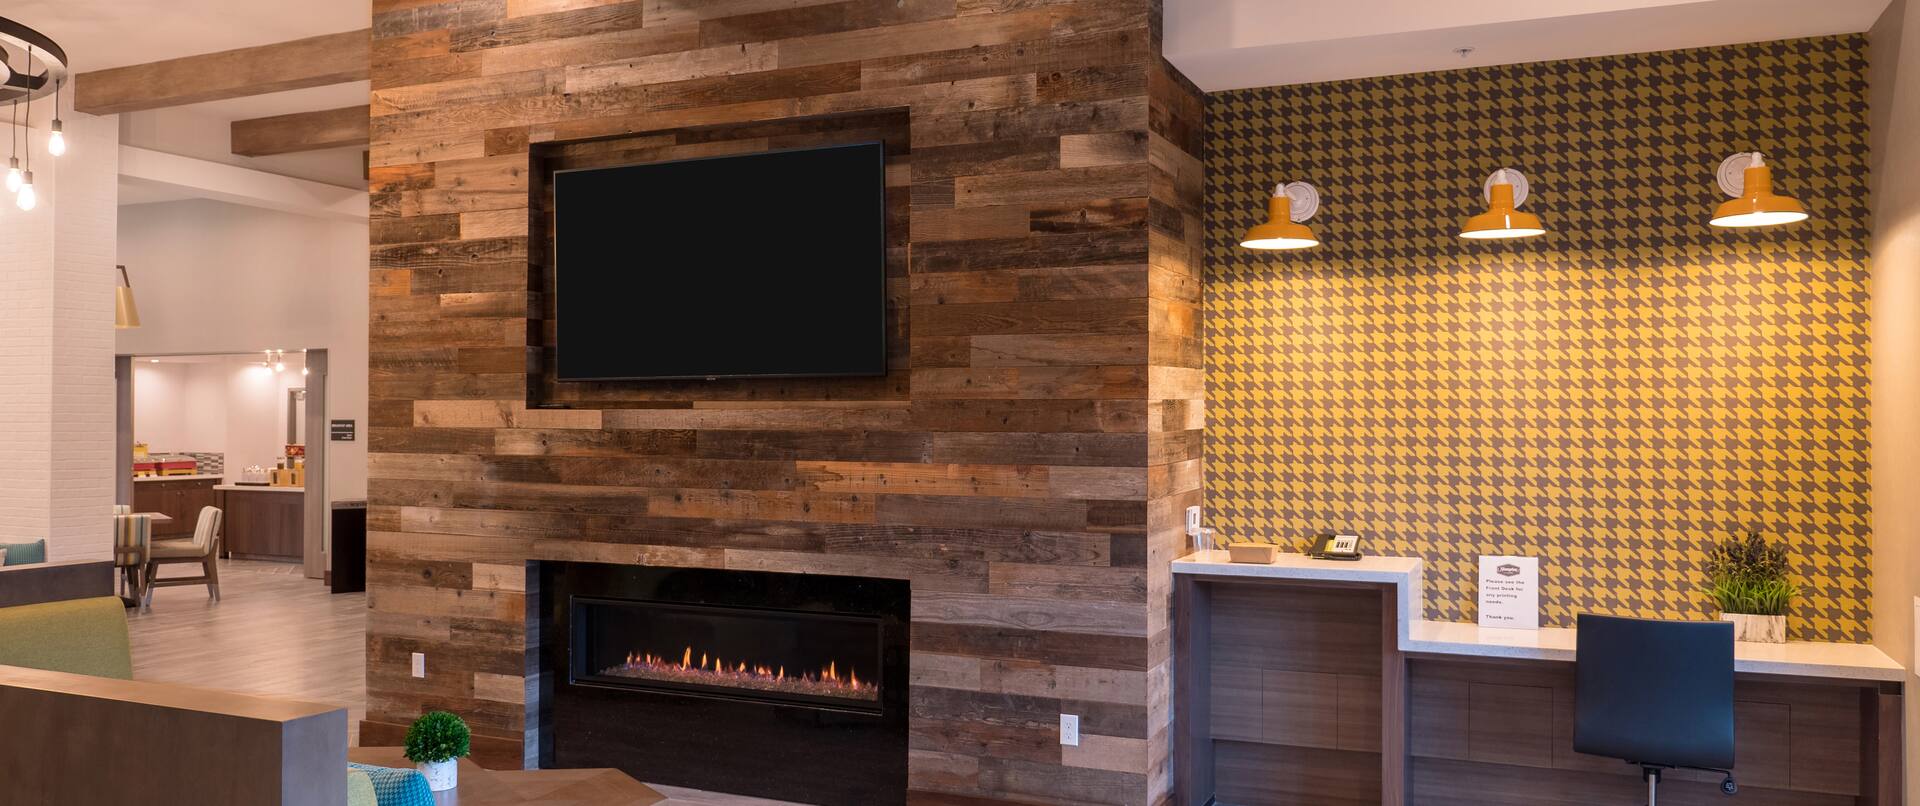 Front Desk Reception Area with Wall-Mounted TV and Fireplace